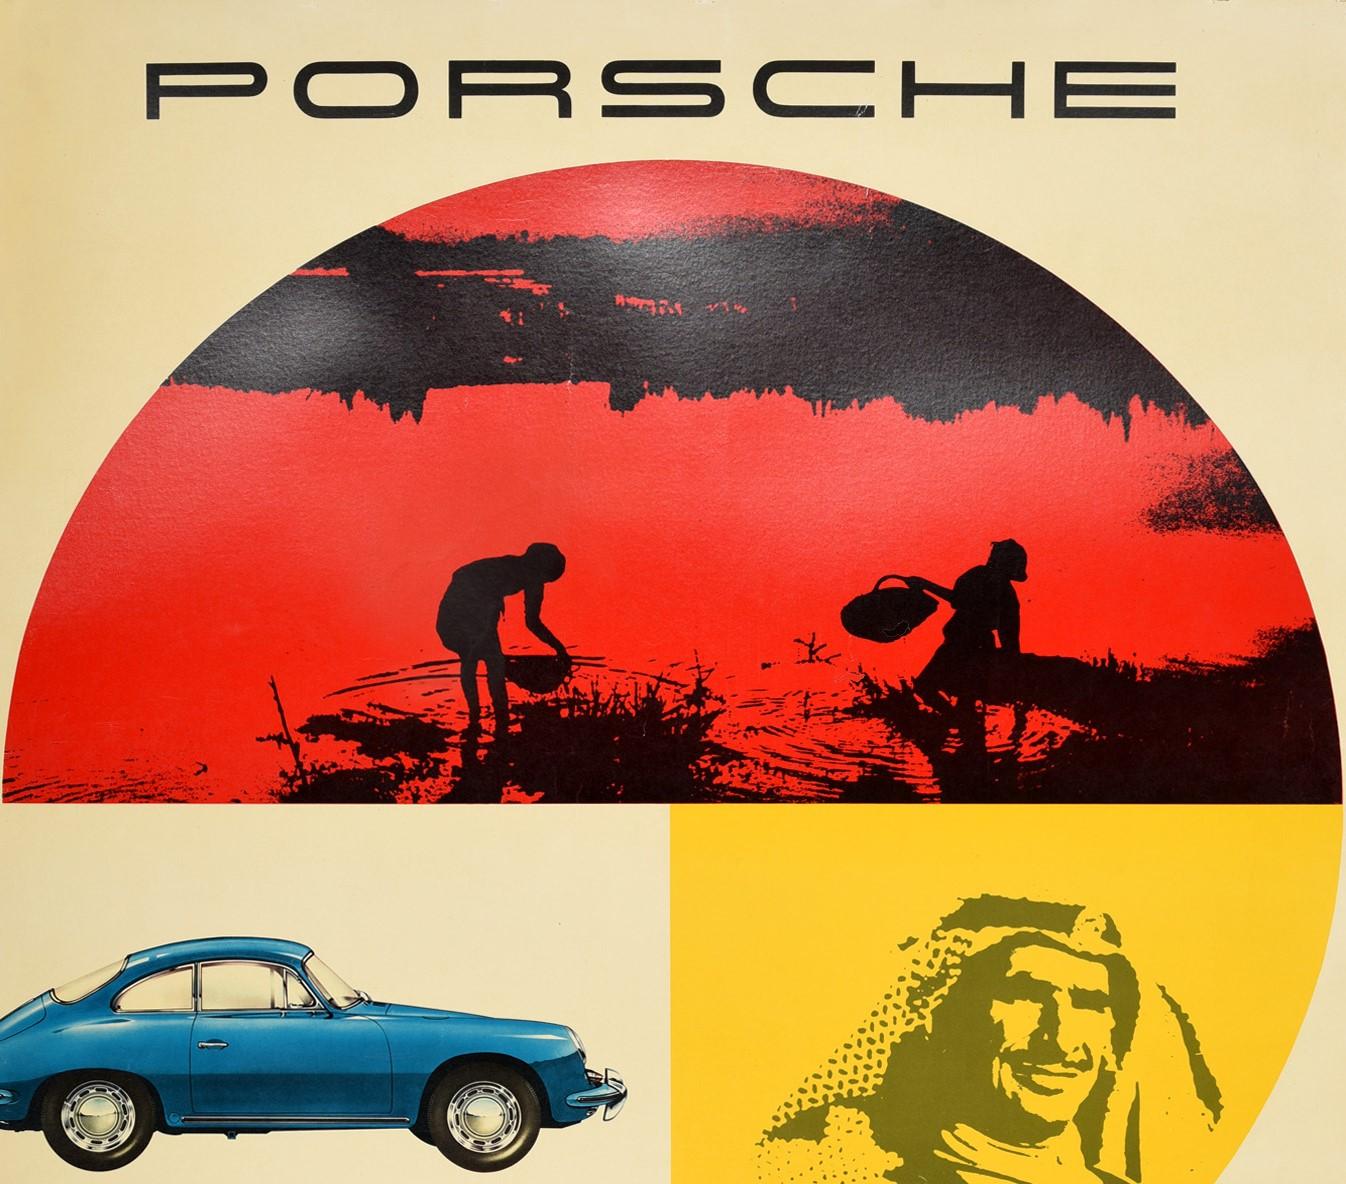 Original vintage car advertising poster for Porsche Service in aller Welt / throughout the World featuring a dynamic design of photographs depicting two people with baskets on a lake in red and black, a blue Porsche car, an Arab man against a yellow